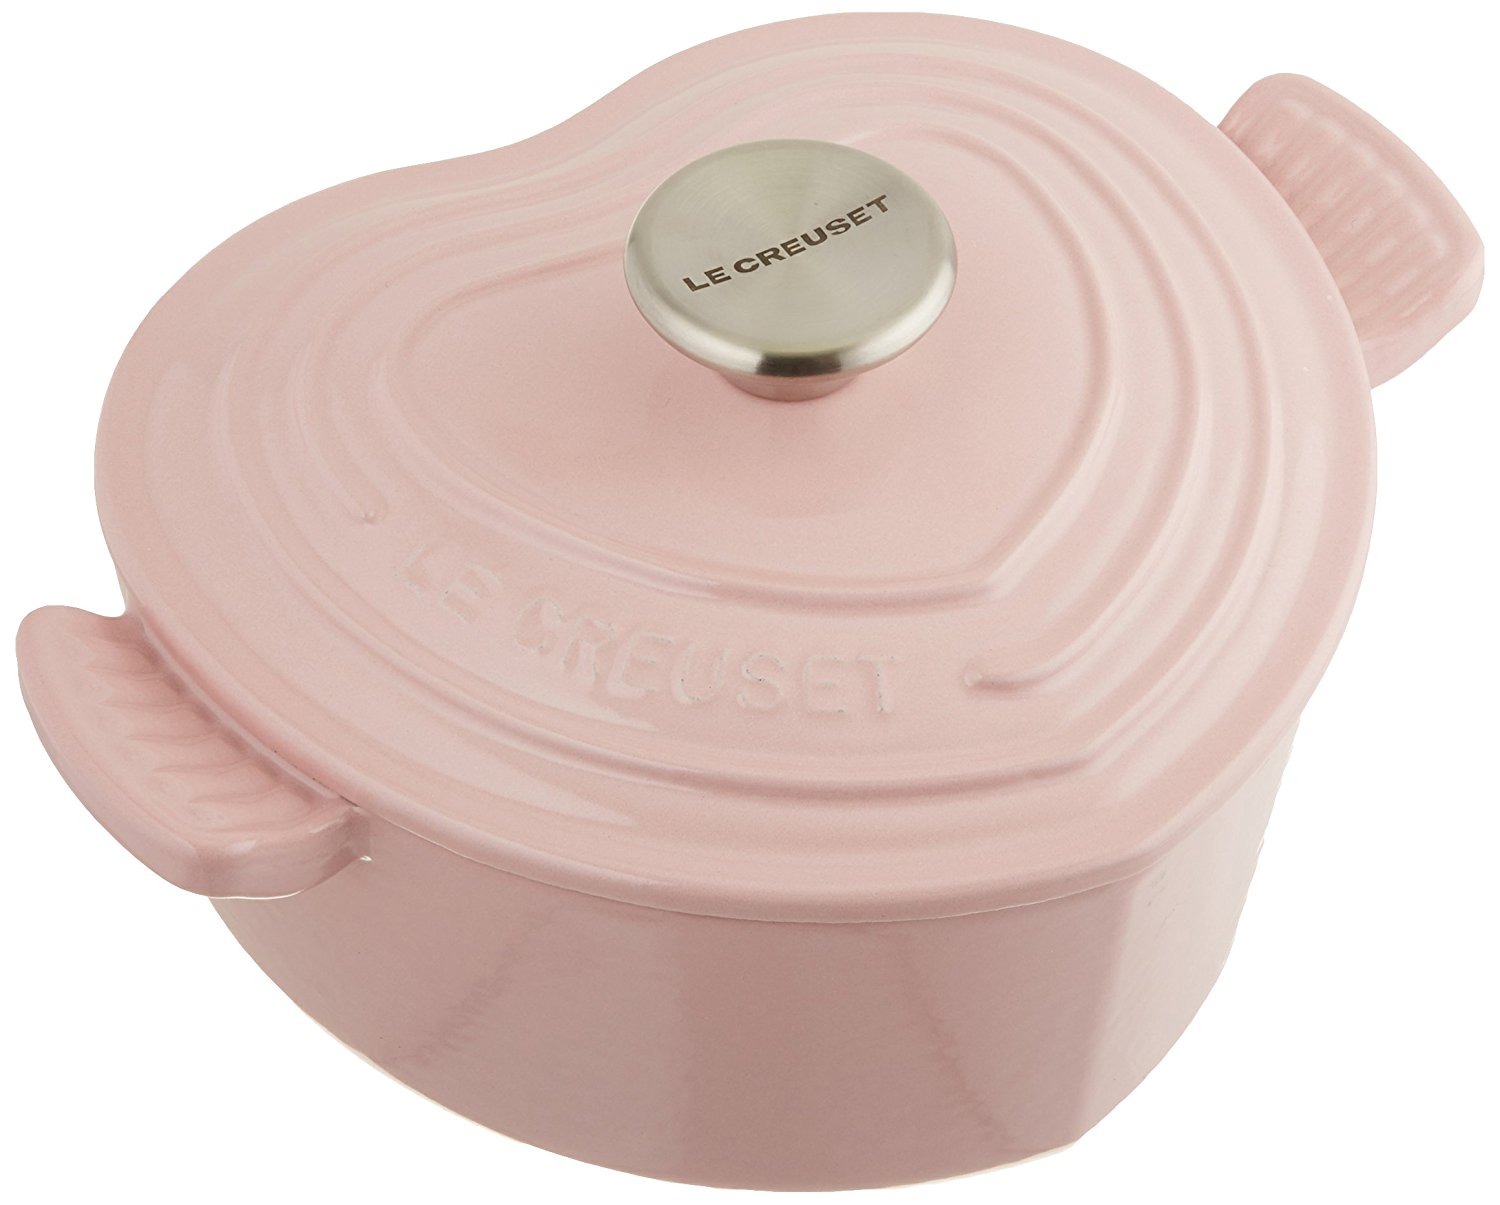 They'll feel the love when you serve your favorite casserole in this heart-shaped Dutch oven from Le Creuset that will last forever, $200 @amazon.com